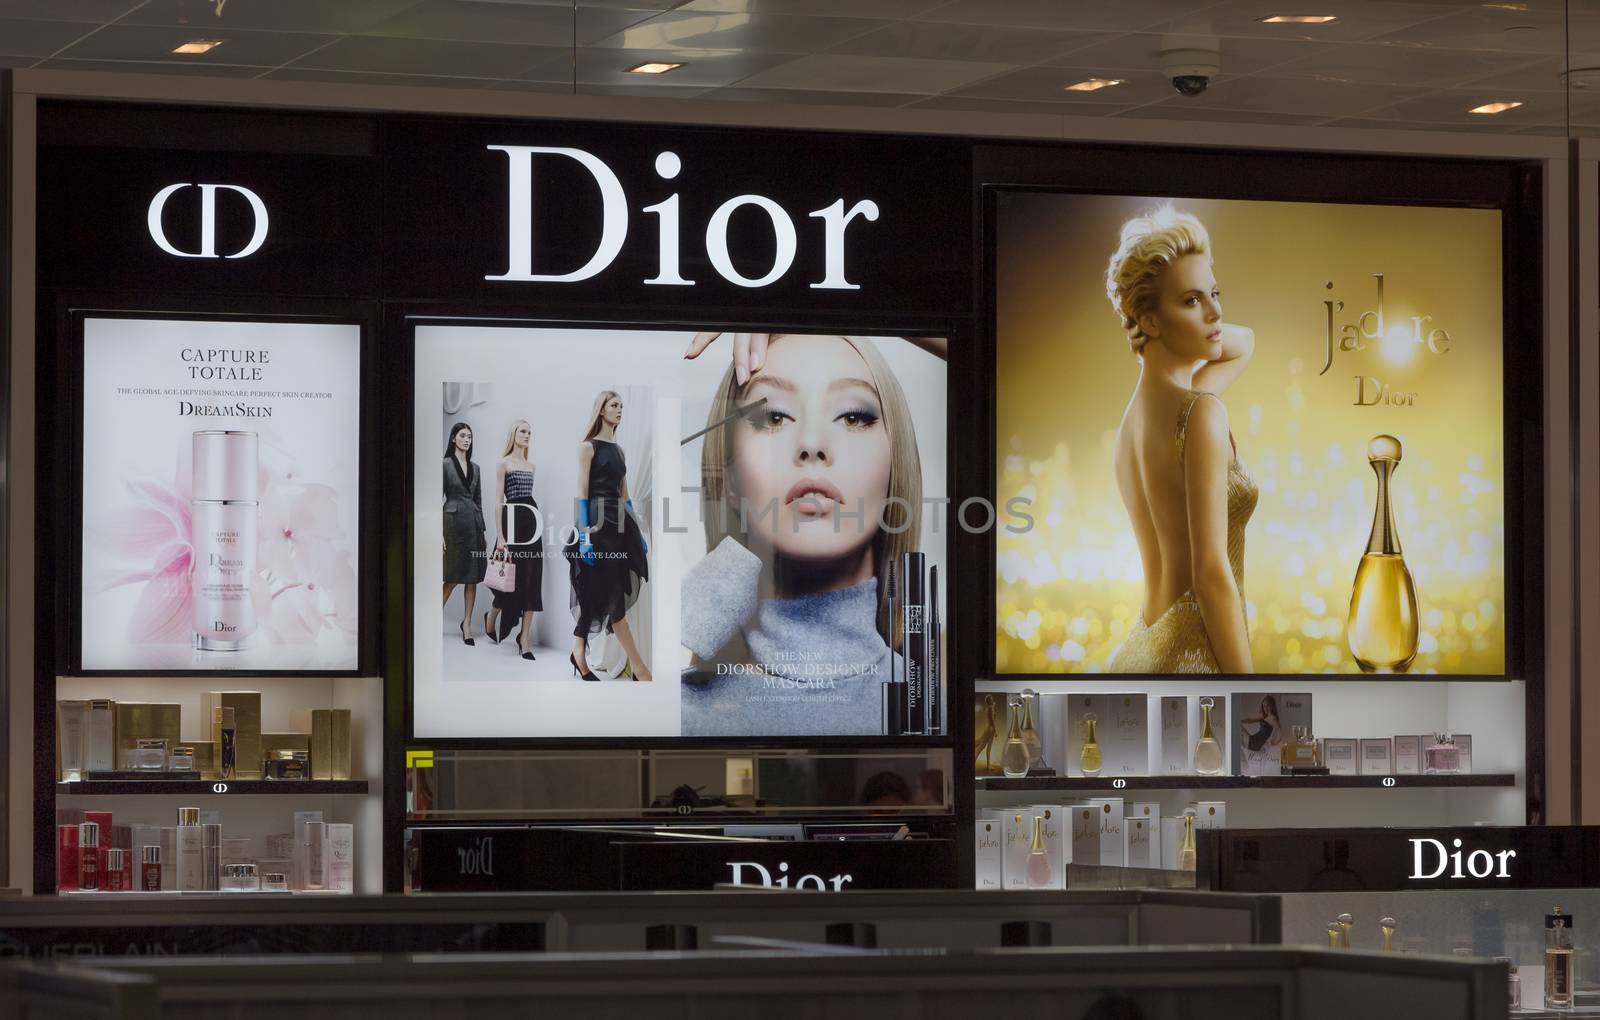 LOS ANGELES, CA/USA - AUGUST 4, 2015: Christian Dior store display. Christian Dior is a French manufacturer and marketer of high-end skincare, makeup, fragrance and hair care products.